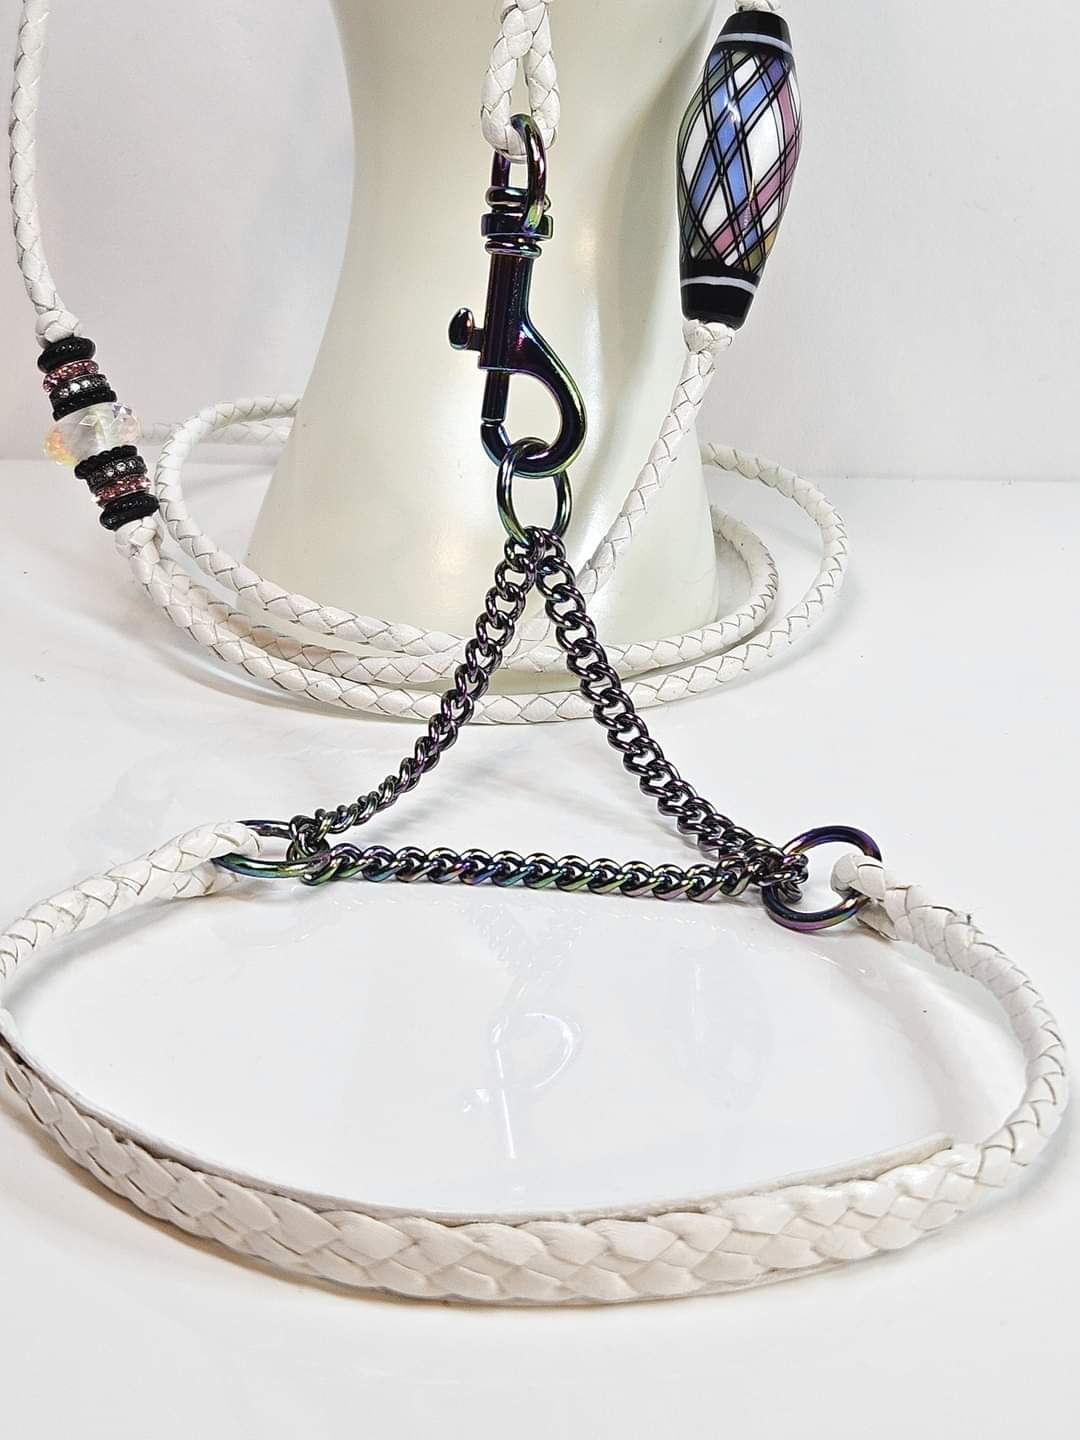 Custom Martingale Collar - Leather Neck with Chain Half-Check - Champion Show Leads